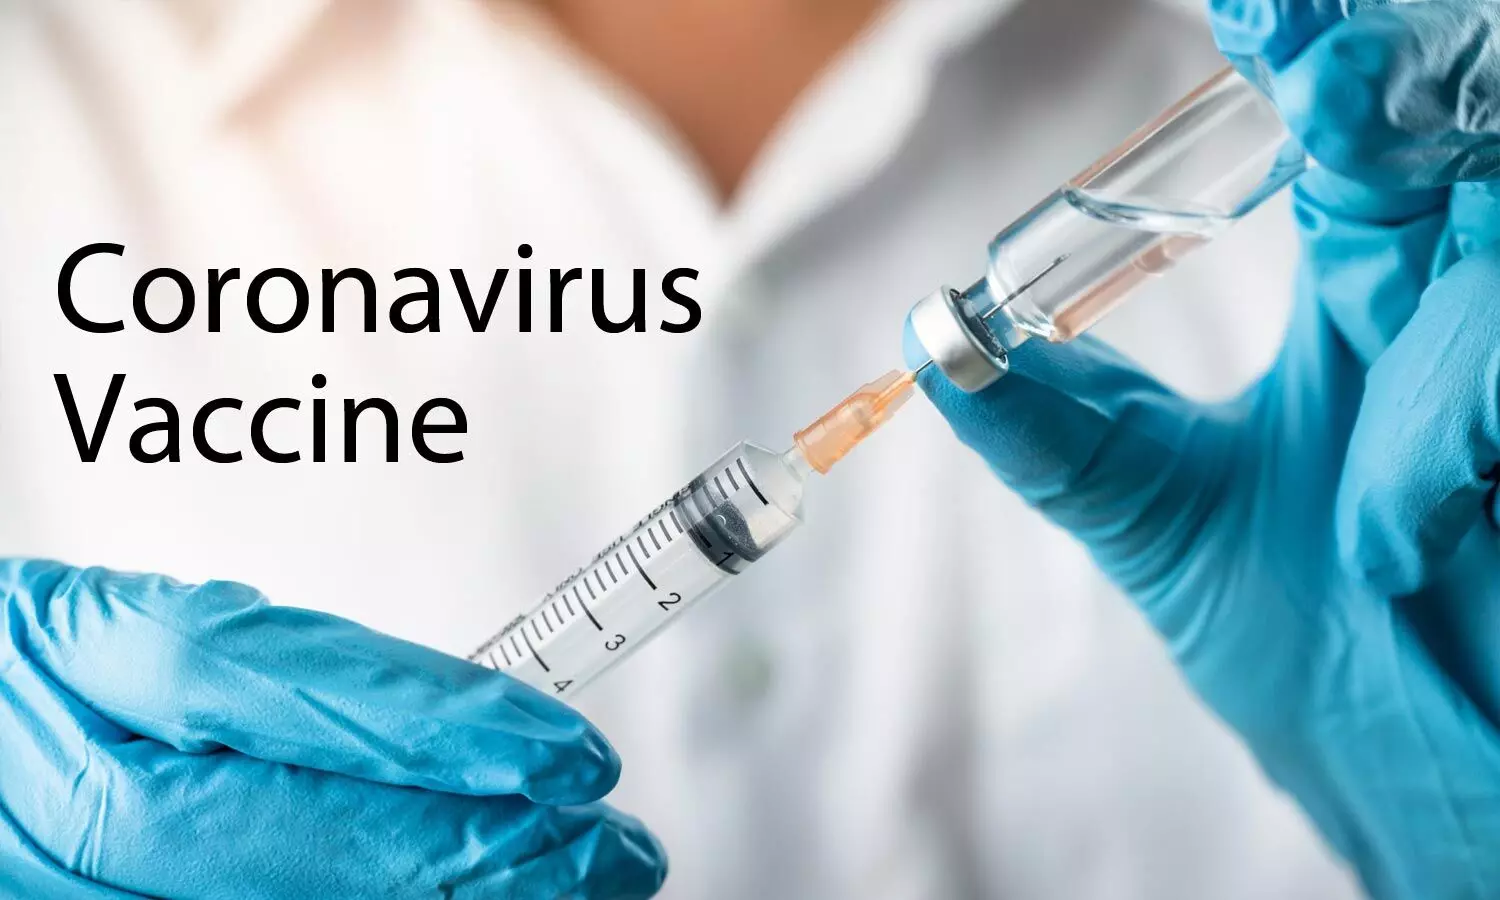 ICMR to launch 1st indigenous COVID 19 vaccine by August 15